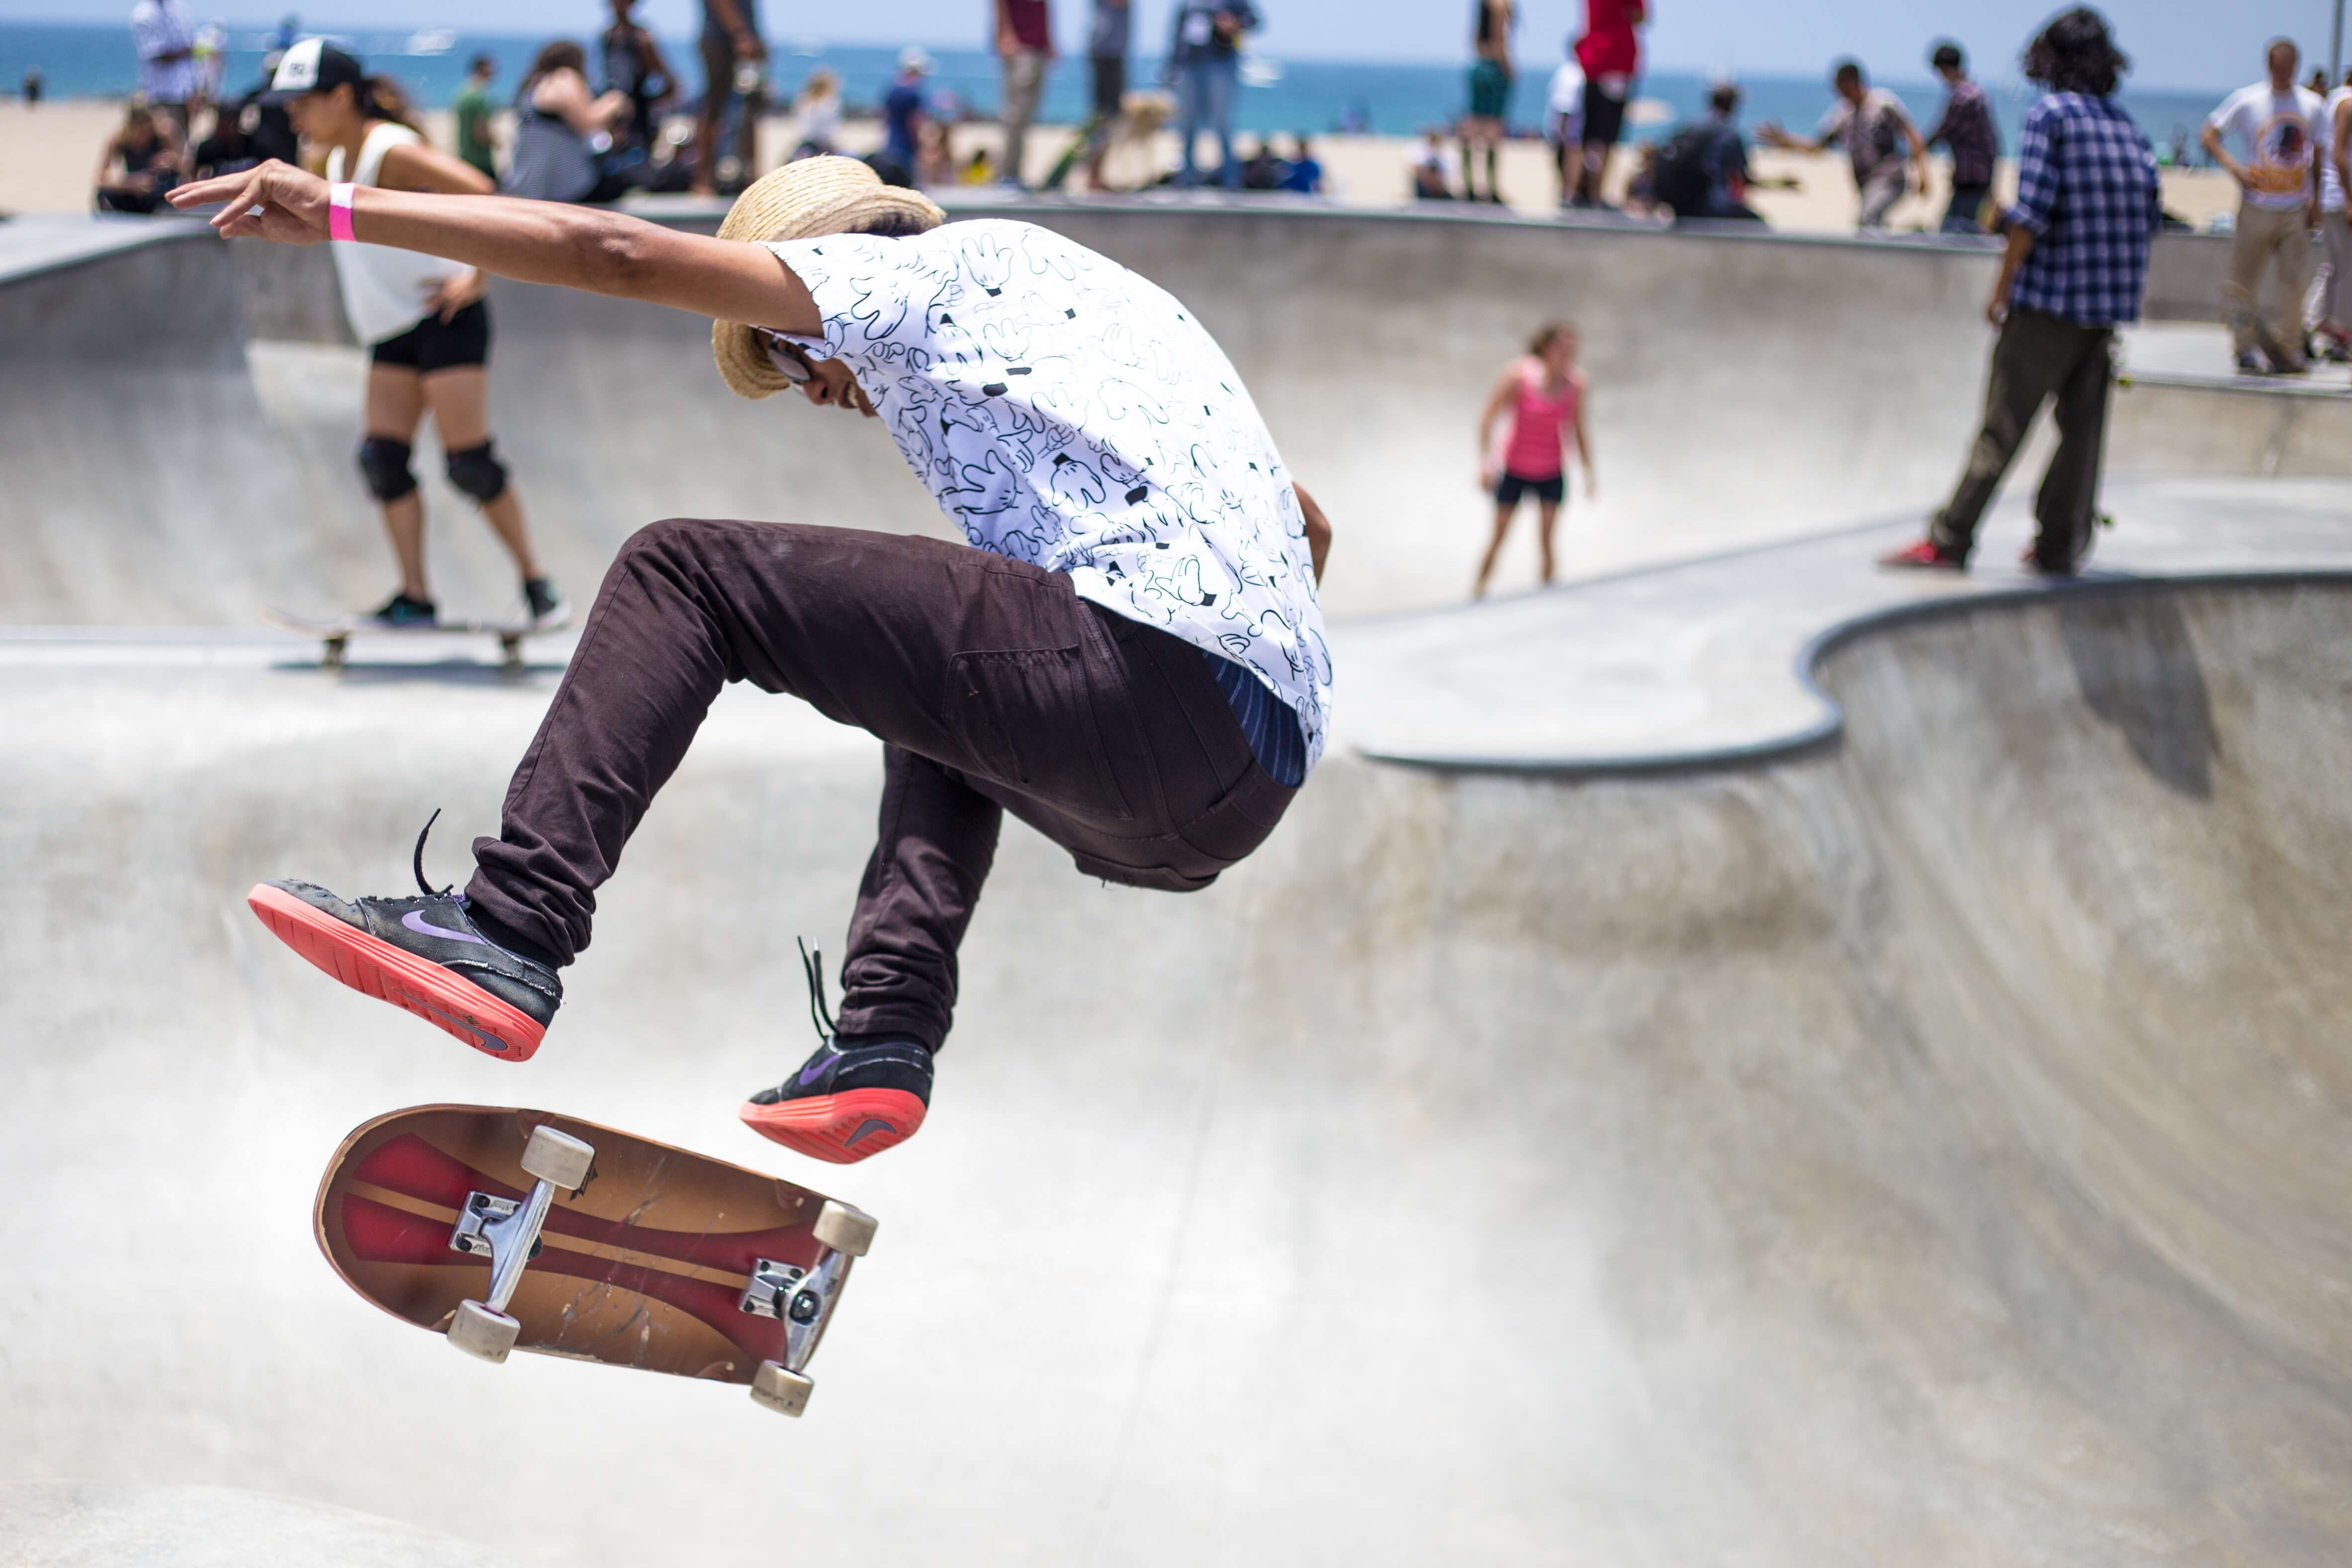 World class skateboard park approved for Des Moines MAP